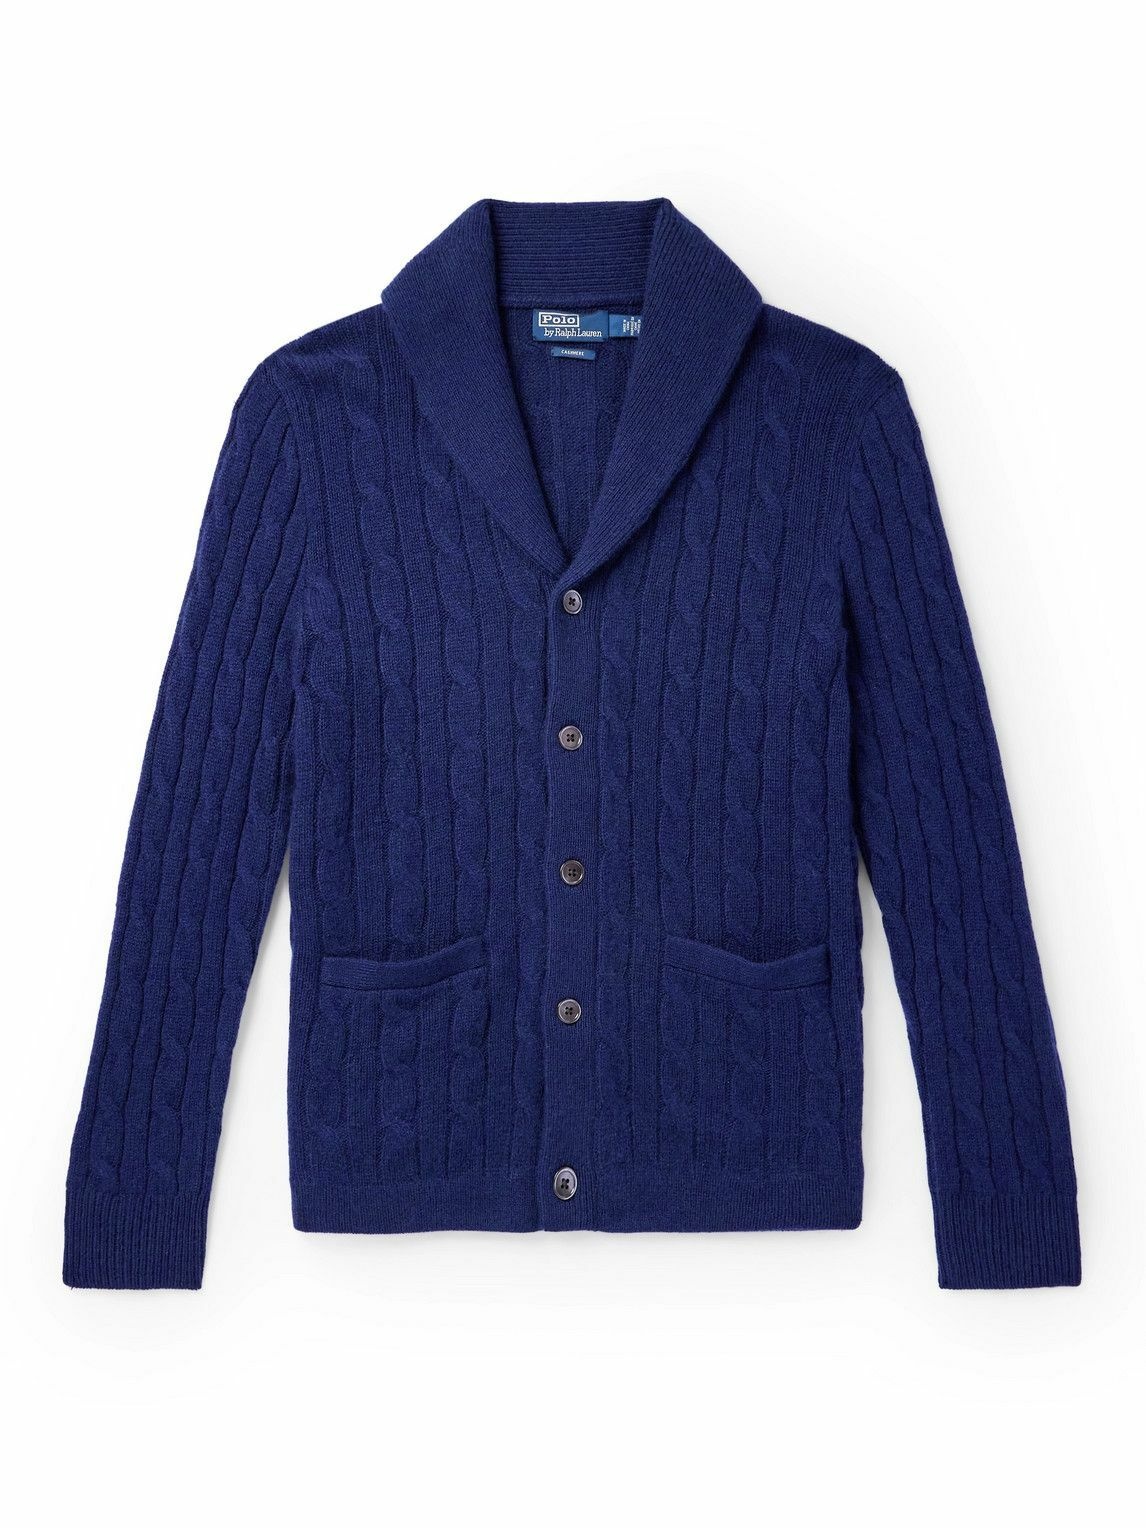 Polo Ralph Lauren - Shawl-Collar Cable-Knit Cashmere Cardigan - Blue ...